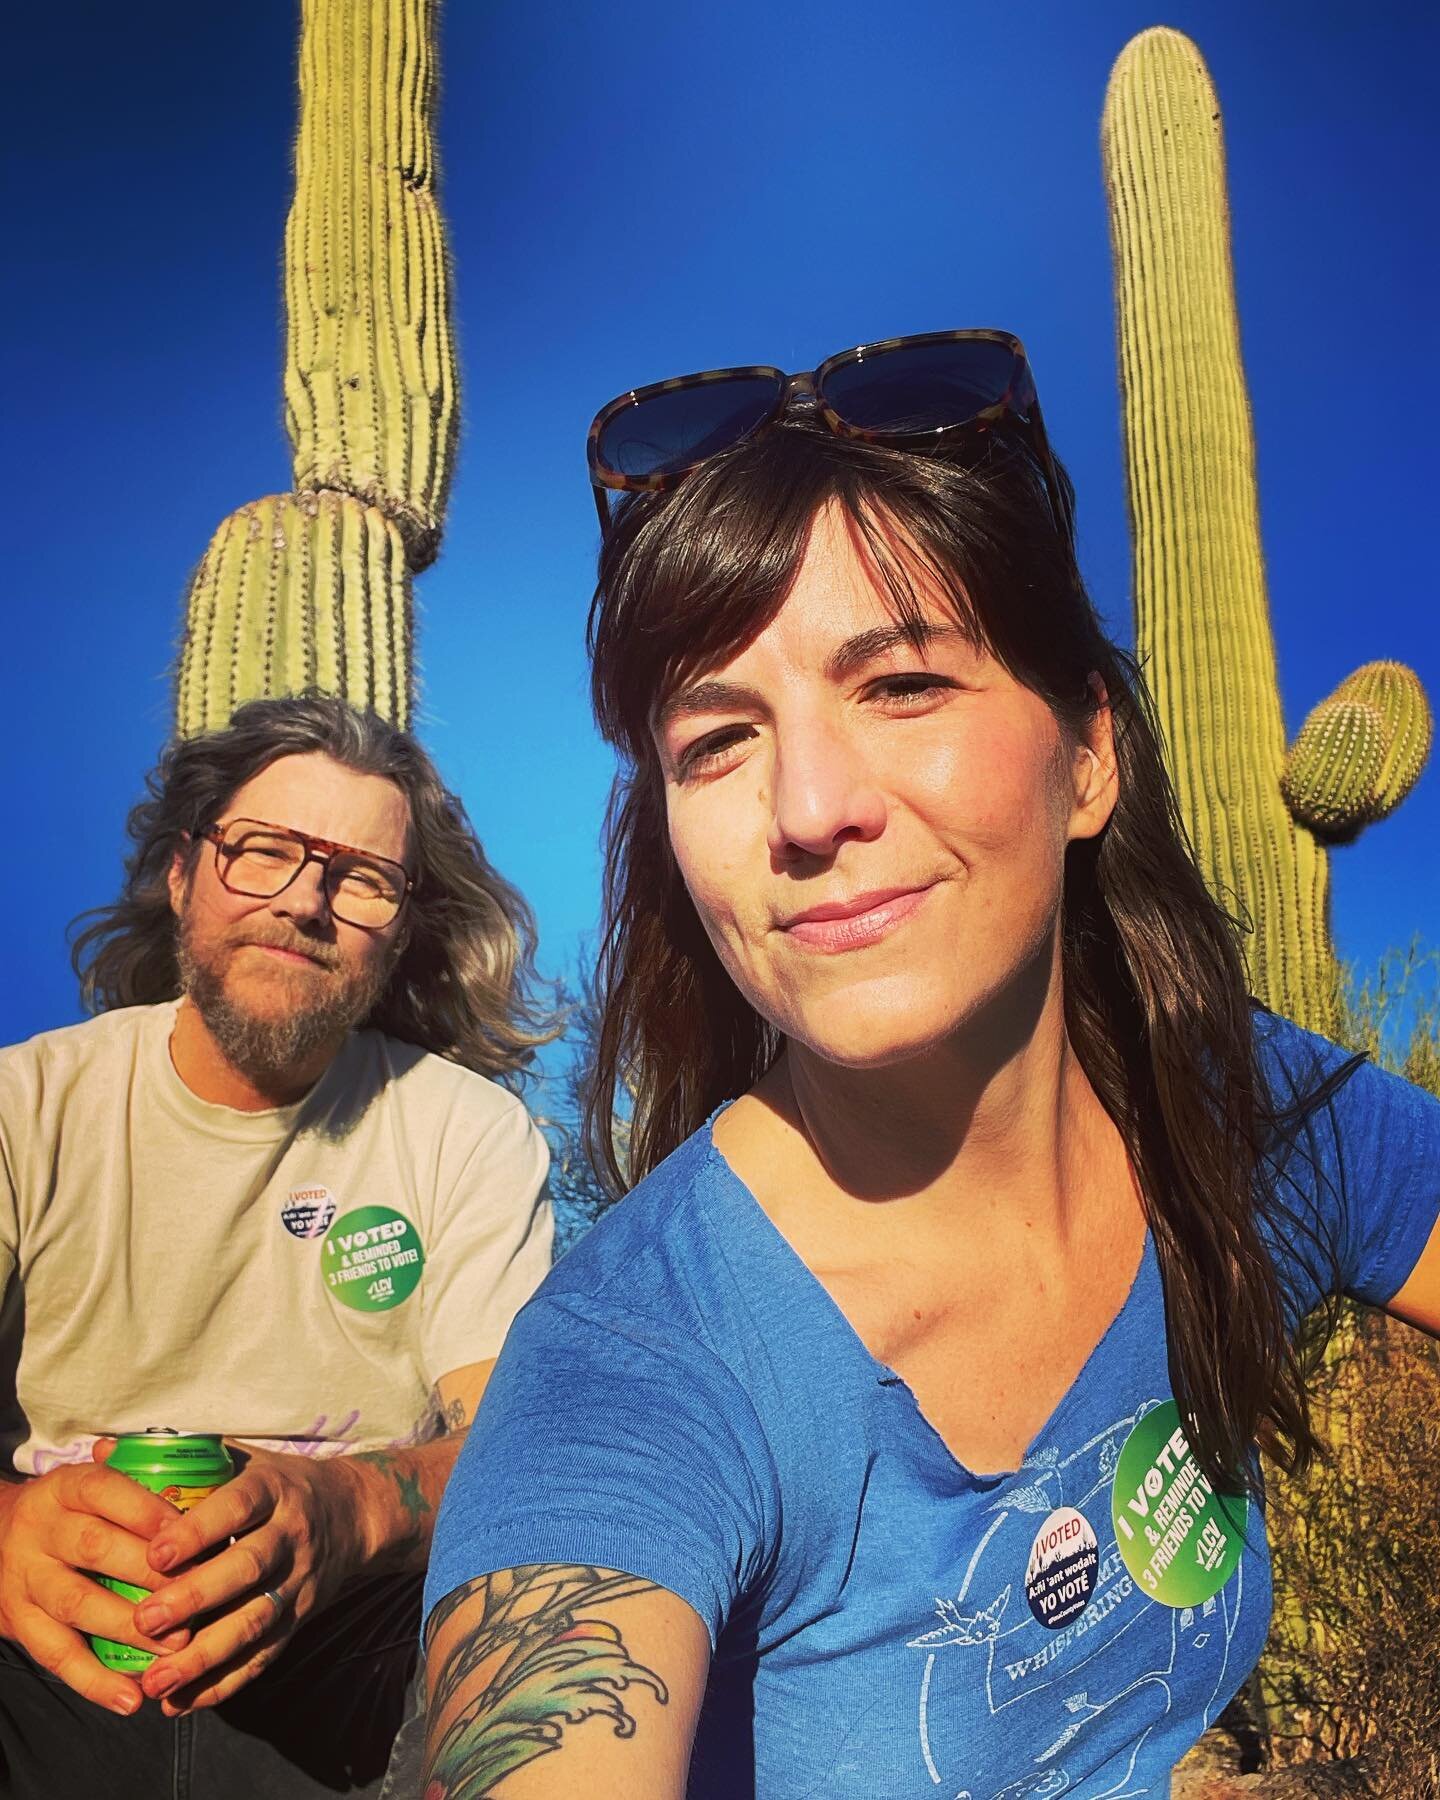 🗳 Pete&rsquo;s first time voting in a mid-term since becoming a citizen.  We voted and then we ran out into the desert. 💙🌵 #vote 
@peteconnollyart